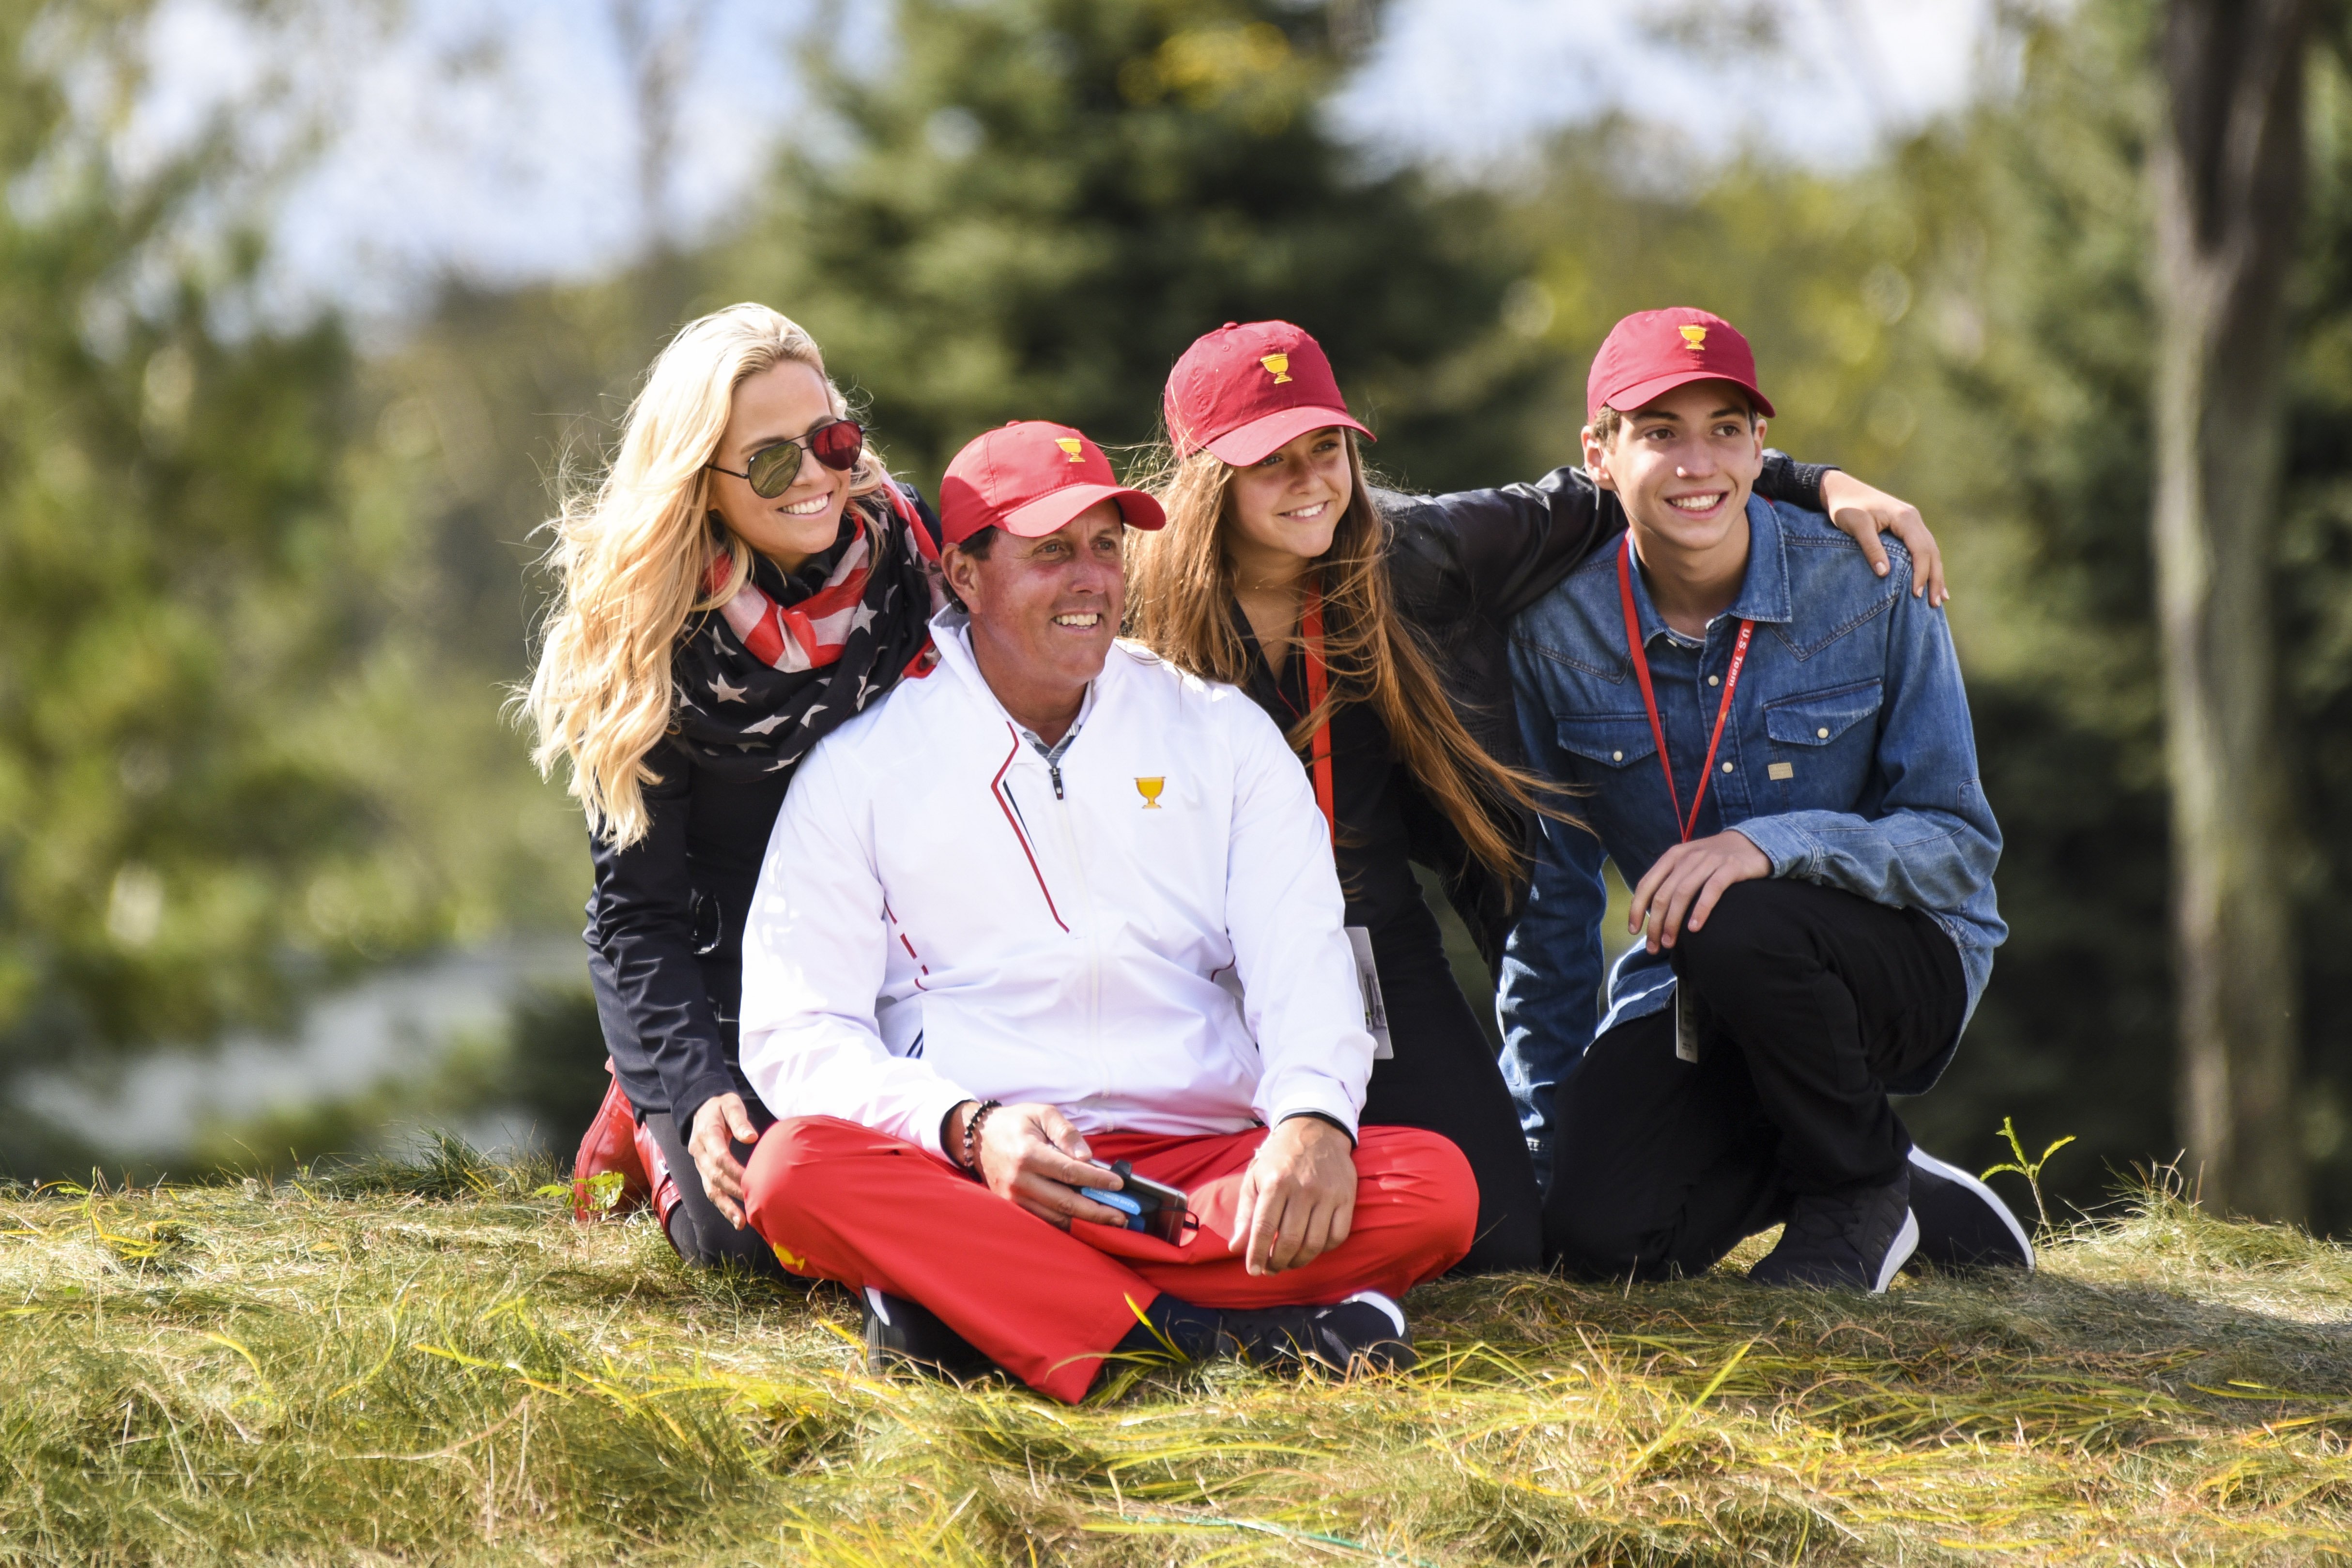 Phil and Amy Mickelson with their children during the third round of the Presidents Cup on September 30, 2017, in Jersey City, New Jersey. | Source: Getty Images